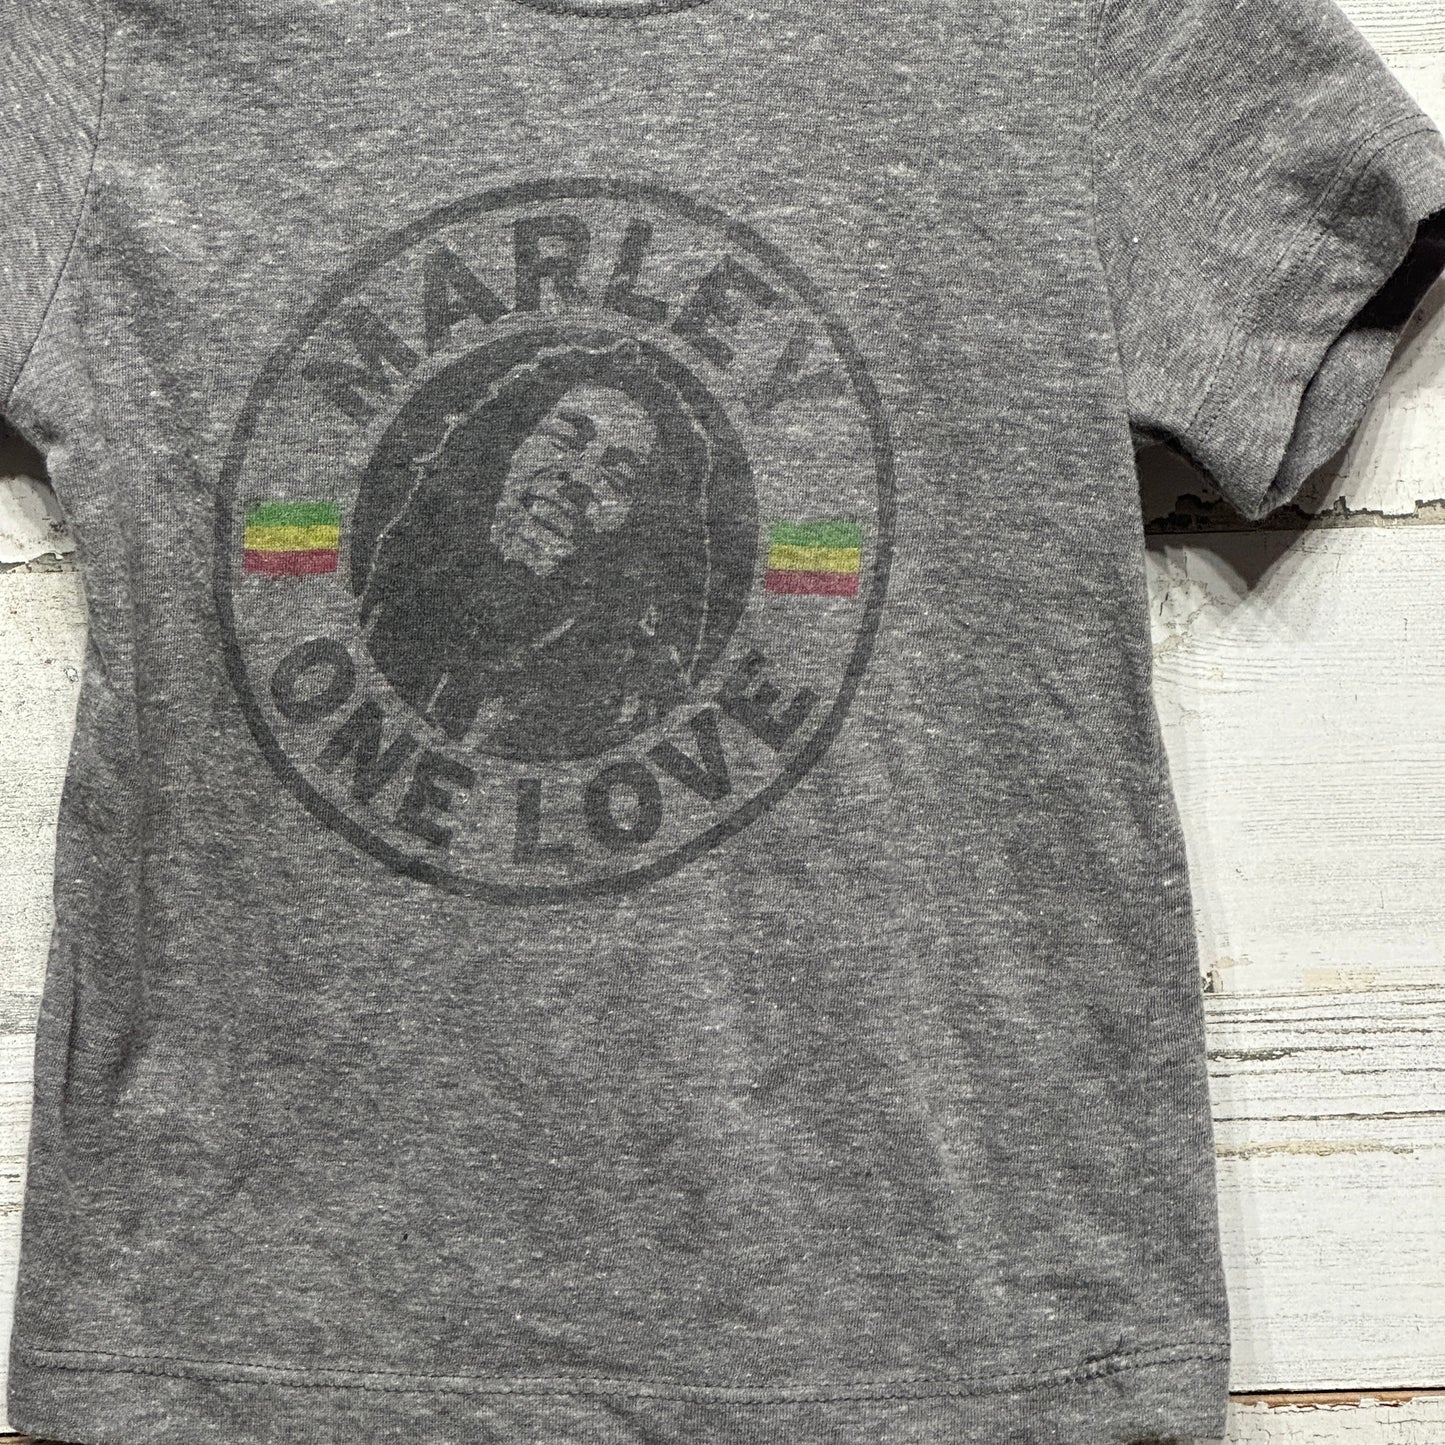 Size 2t Zion Rootswear Bob Marley Tee - Good Used Condition